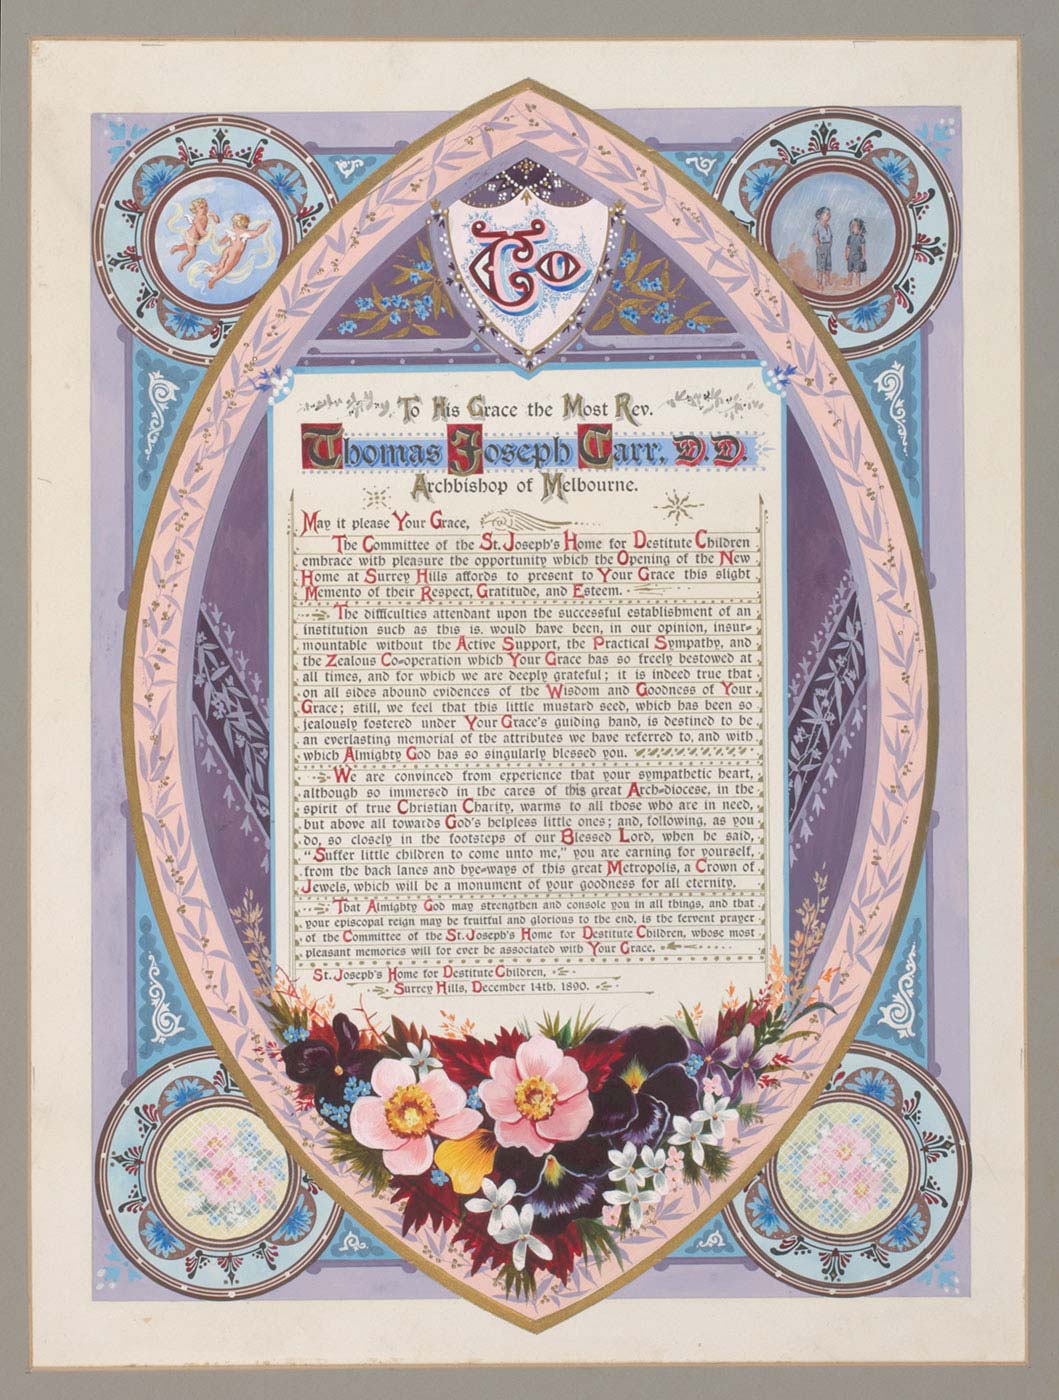 Page from a religious-themed book featuring calligraphy, ornate borders and illustrations. - click to view larger image